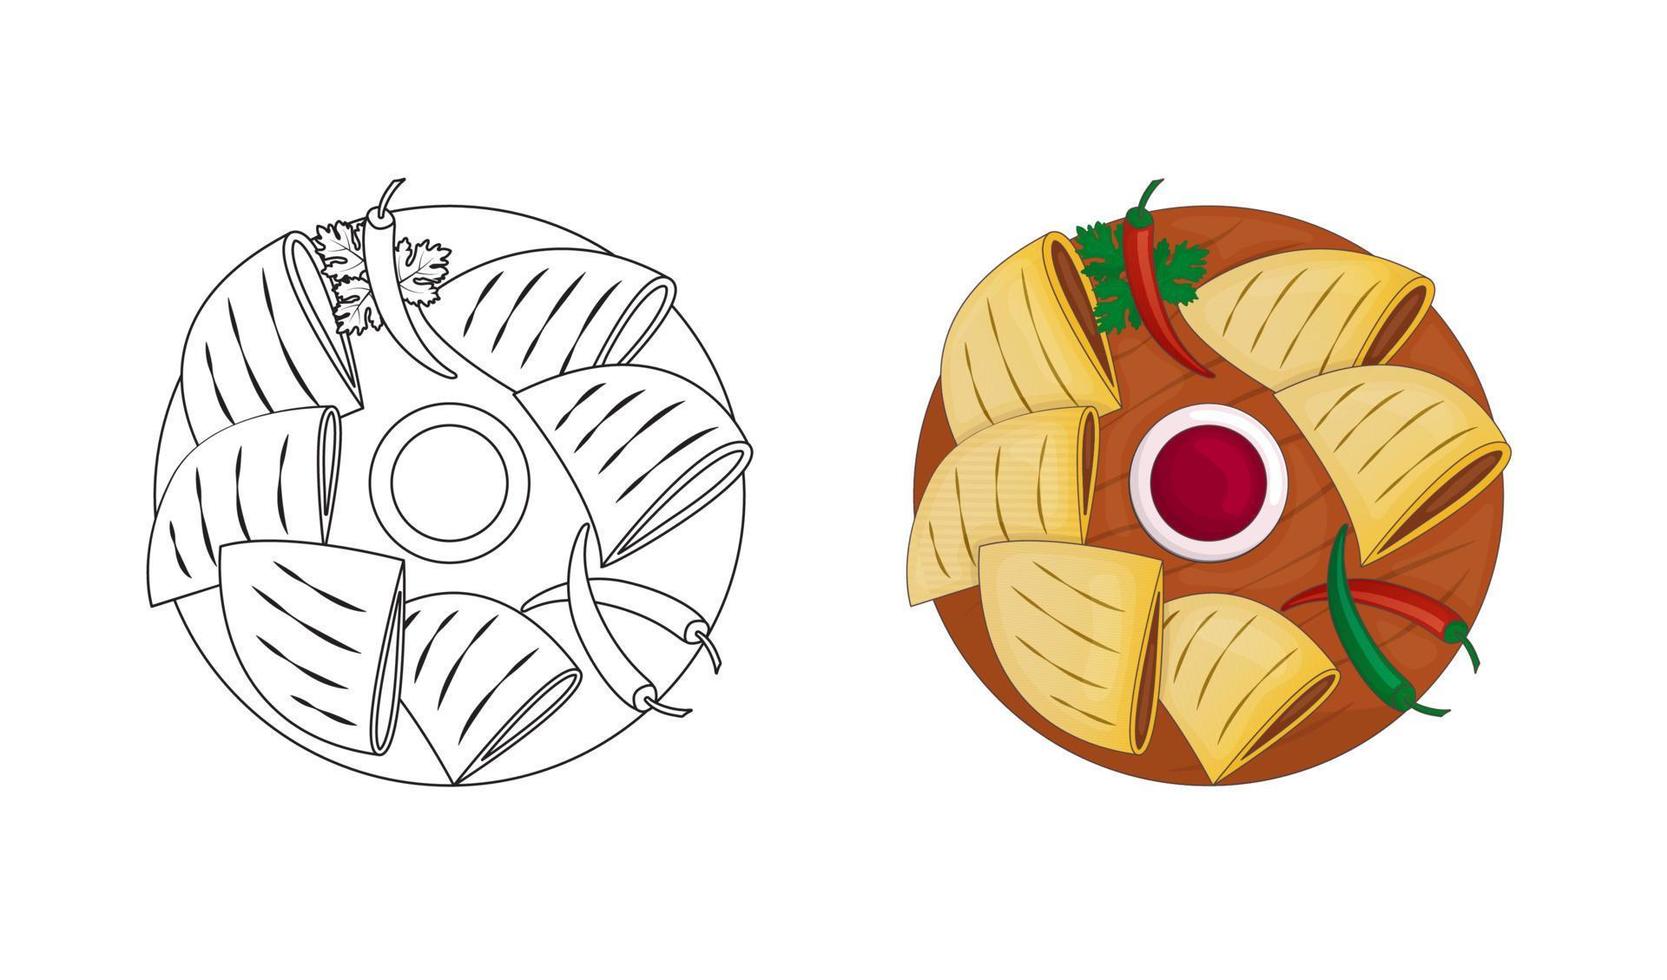 Quick Mexican snack - Quesadilla with hearty filling and sauce. Kids coloring book for elementary school. Pan-fried tortillas. Vector illustration. Cartoon.